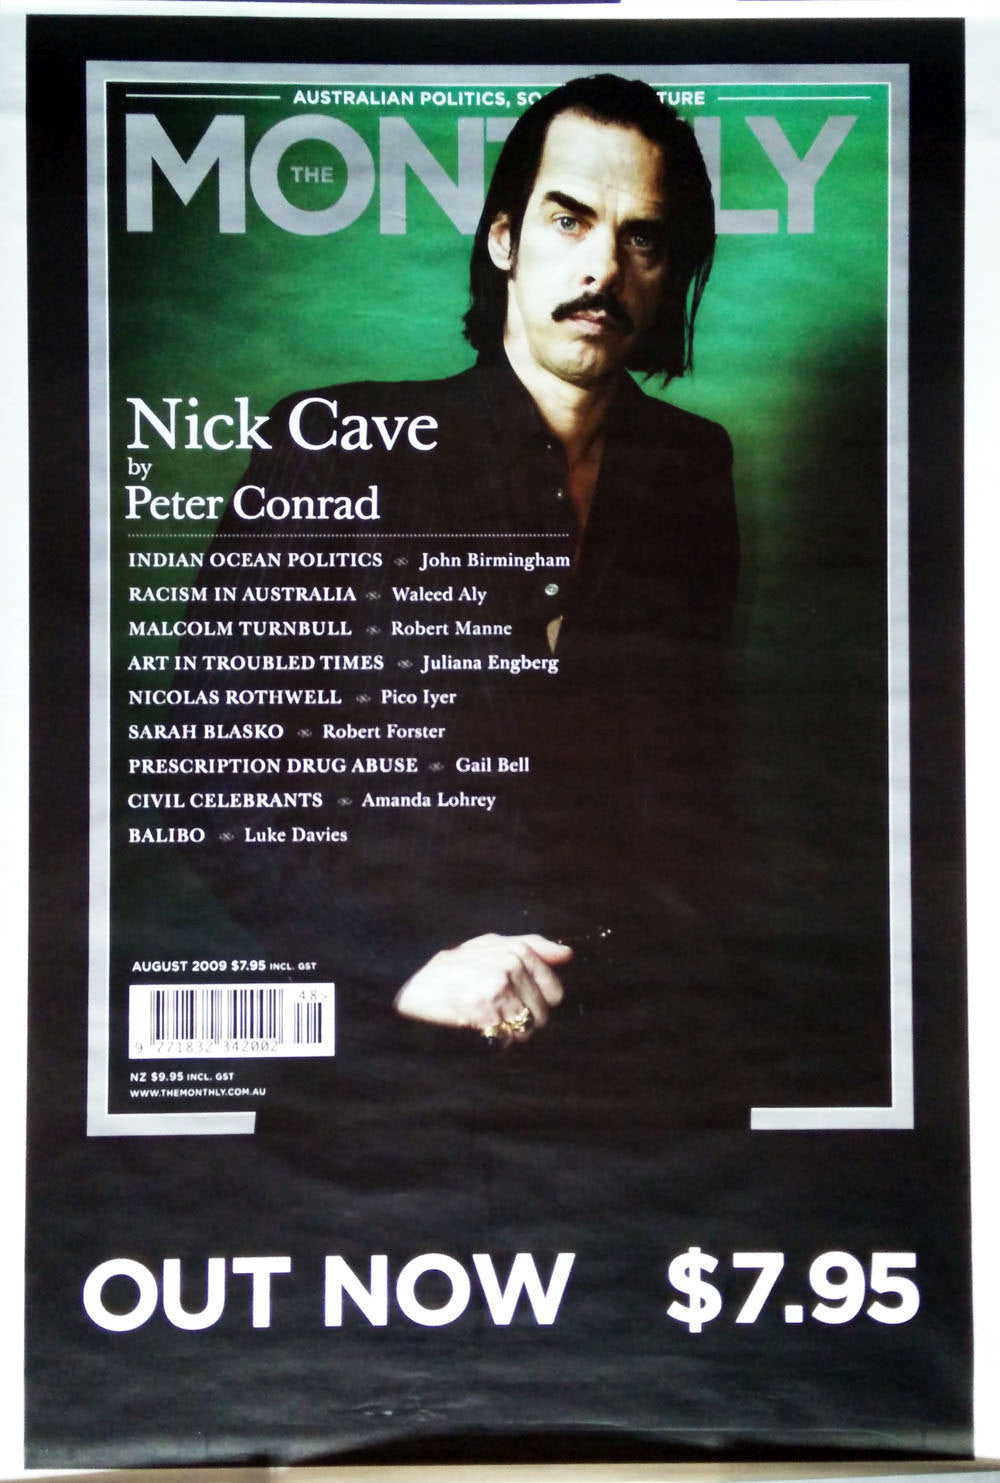 CAVE-- NICK - The Monthly Magazine Promotional Poster - 1